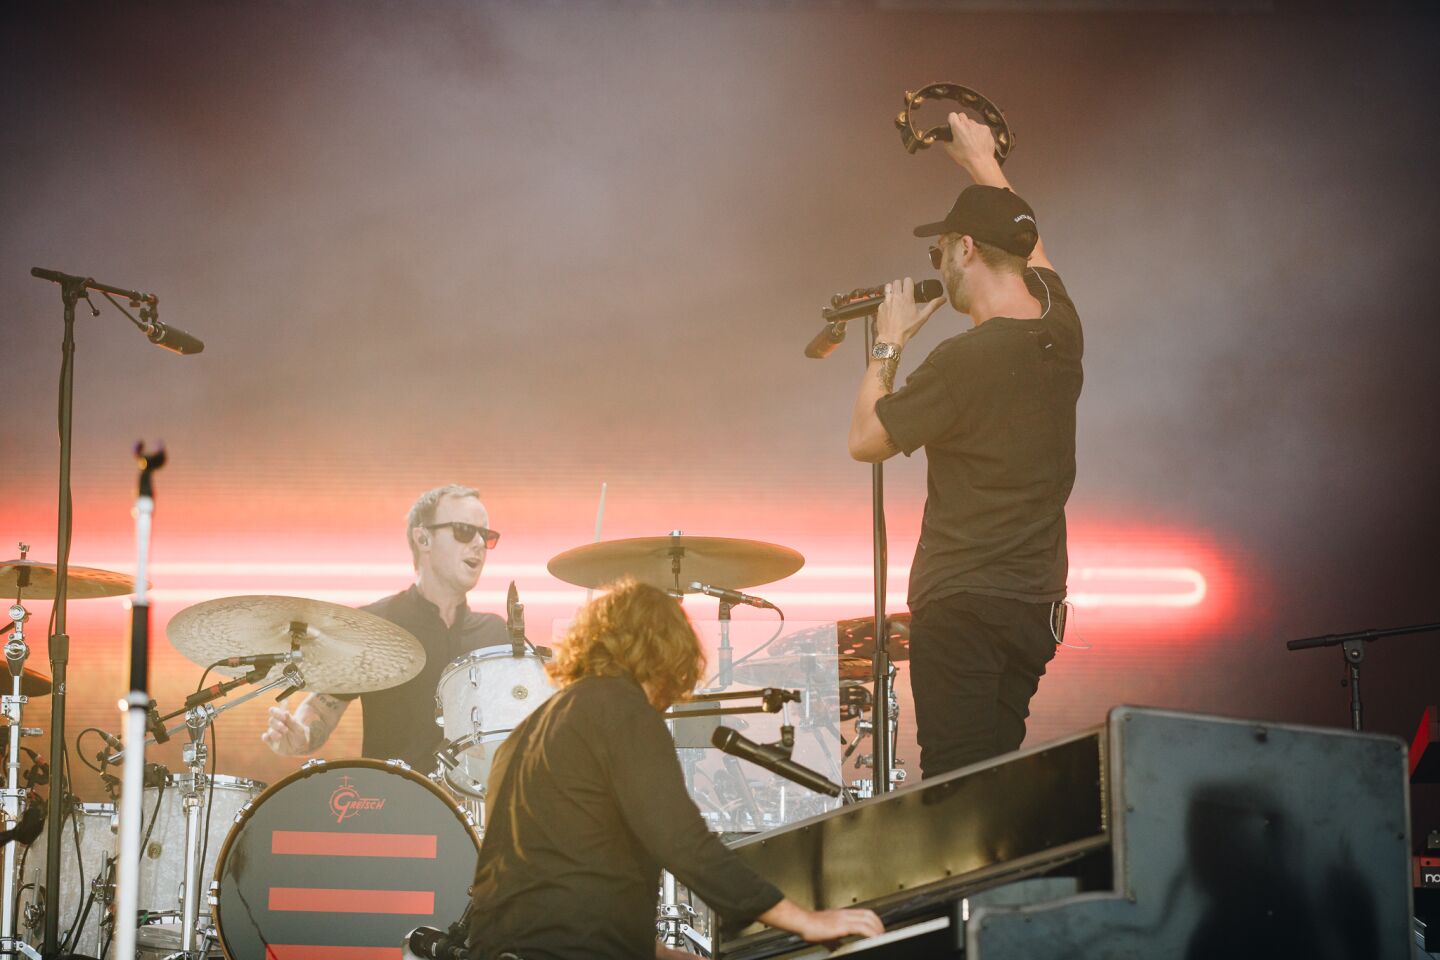 Day 2 of KAABOO Del Mar featured performances from Switchfoot, Sublime with Rome and Dave Matthews Band, plus a silent disco.